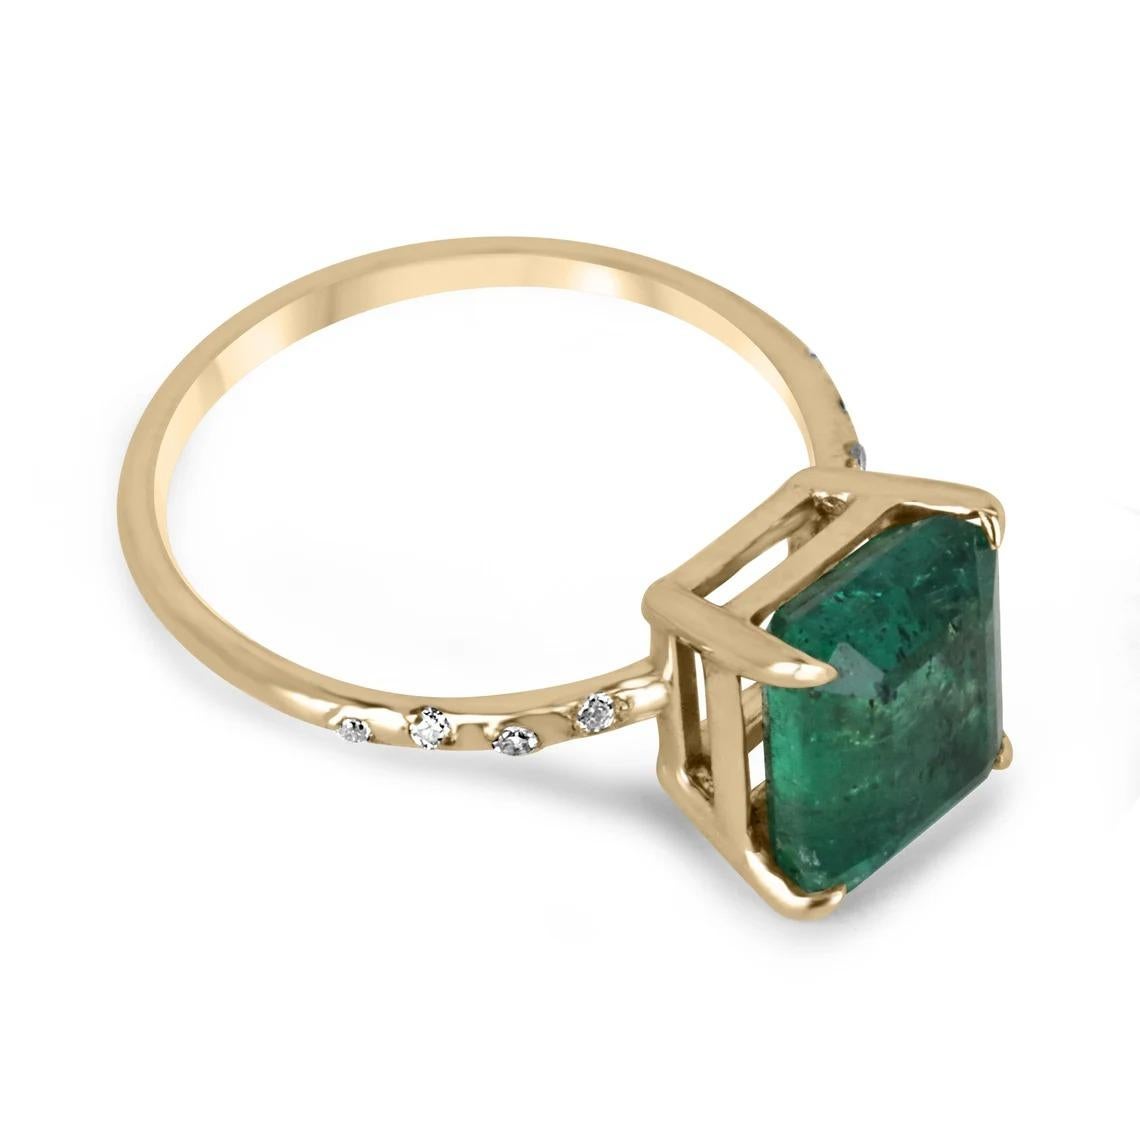 Displayed is a modern emerald and diamond solitaire engagement ring/right-hand ring in 14K yellow gold. This gorgeous solitaire ring carries a 2.60-carat emerald in a four-prong setting. Fully faceted, this gemstone showcases excellent shine. The